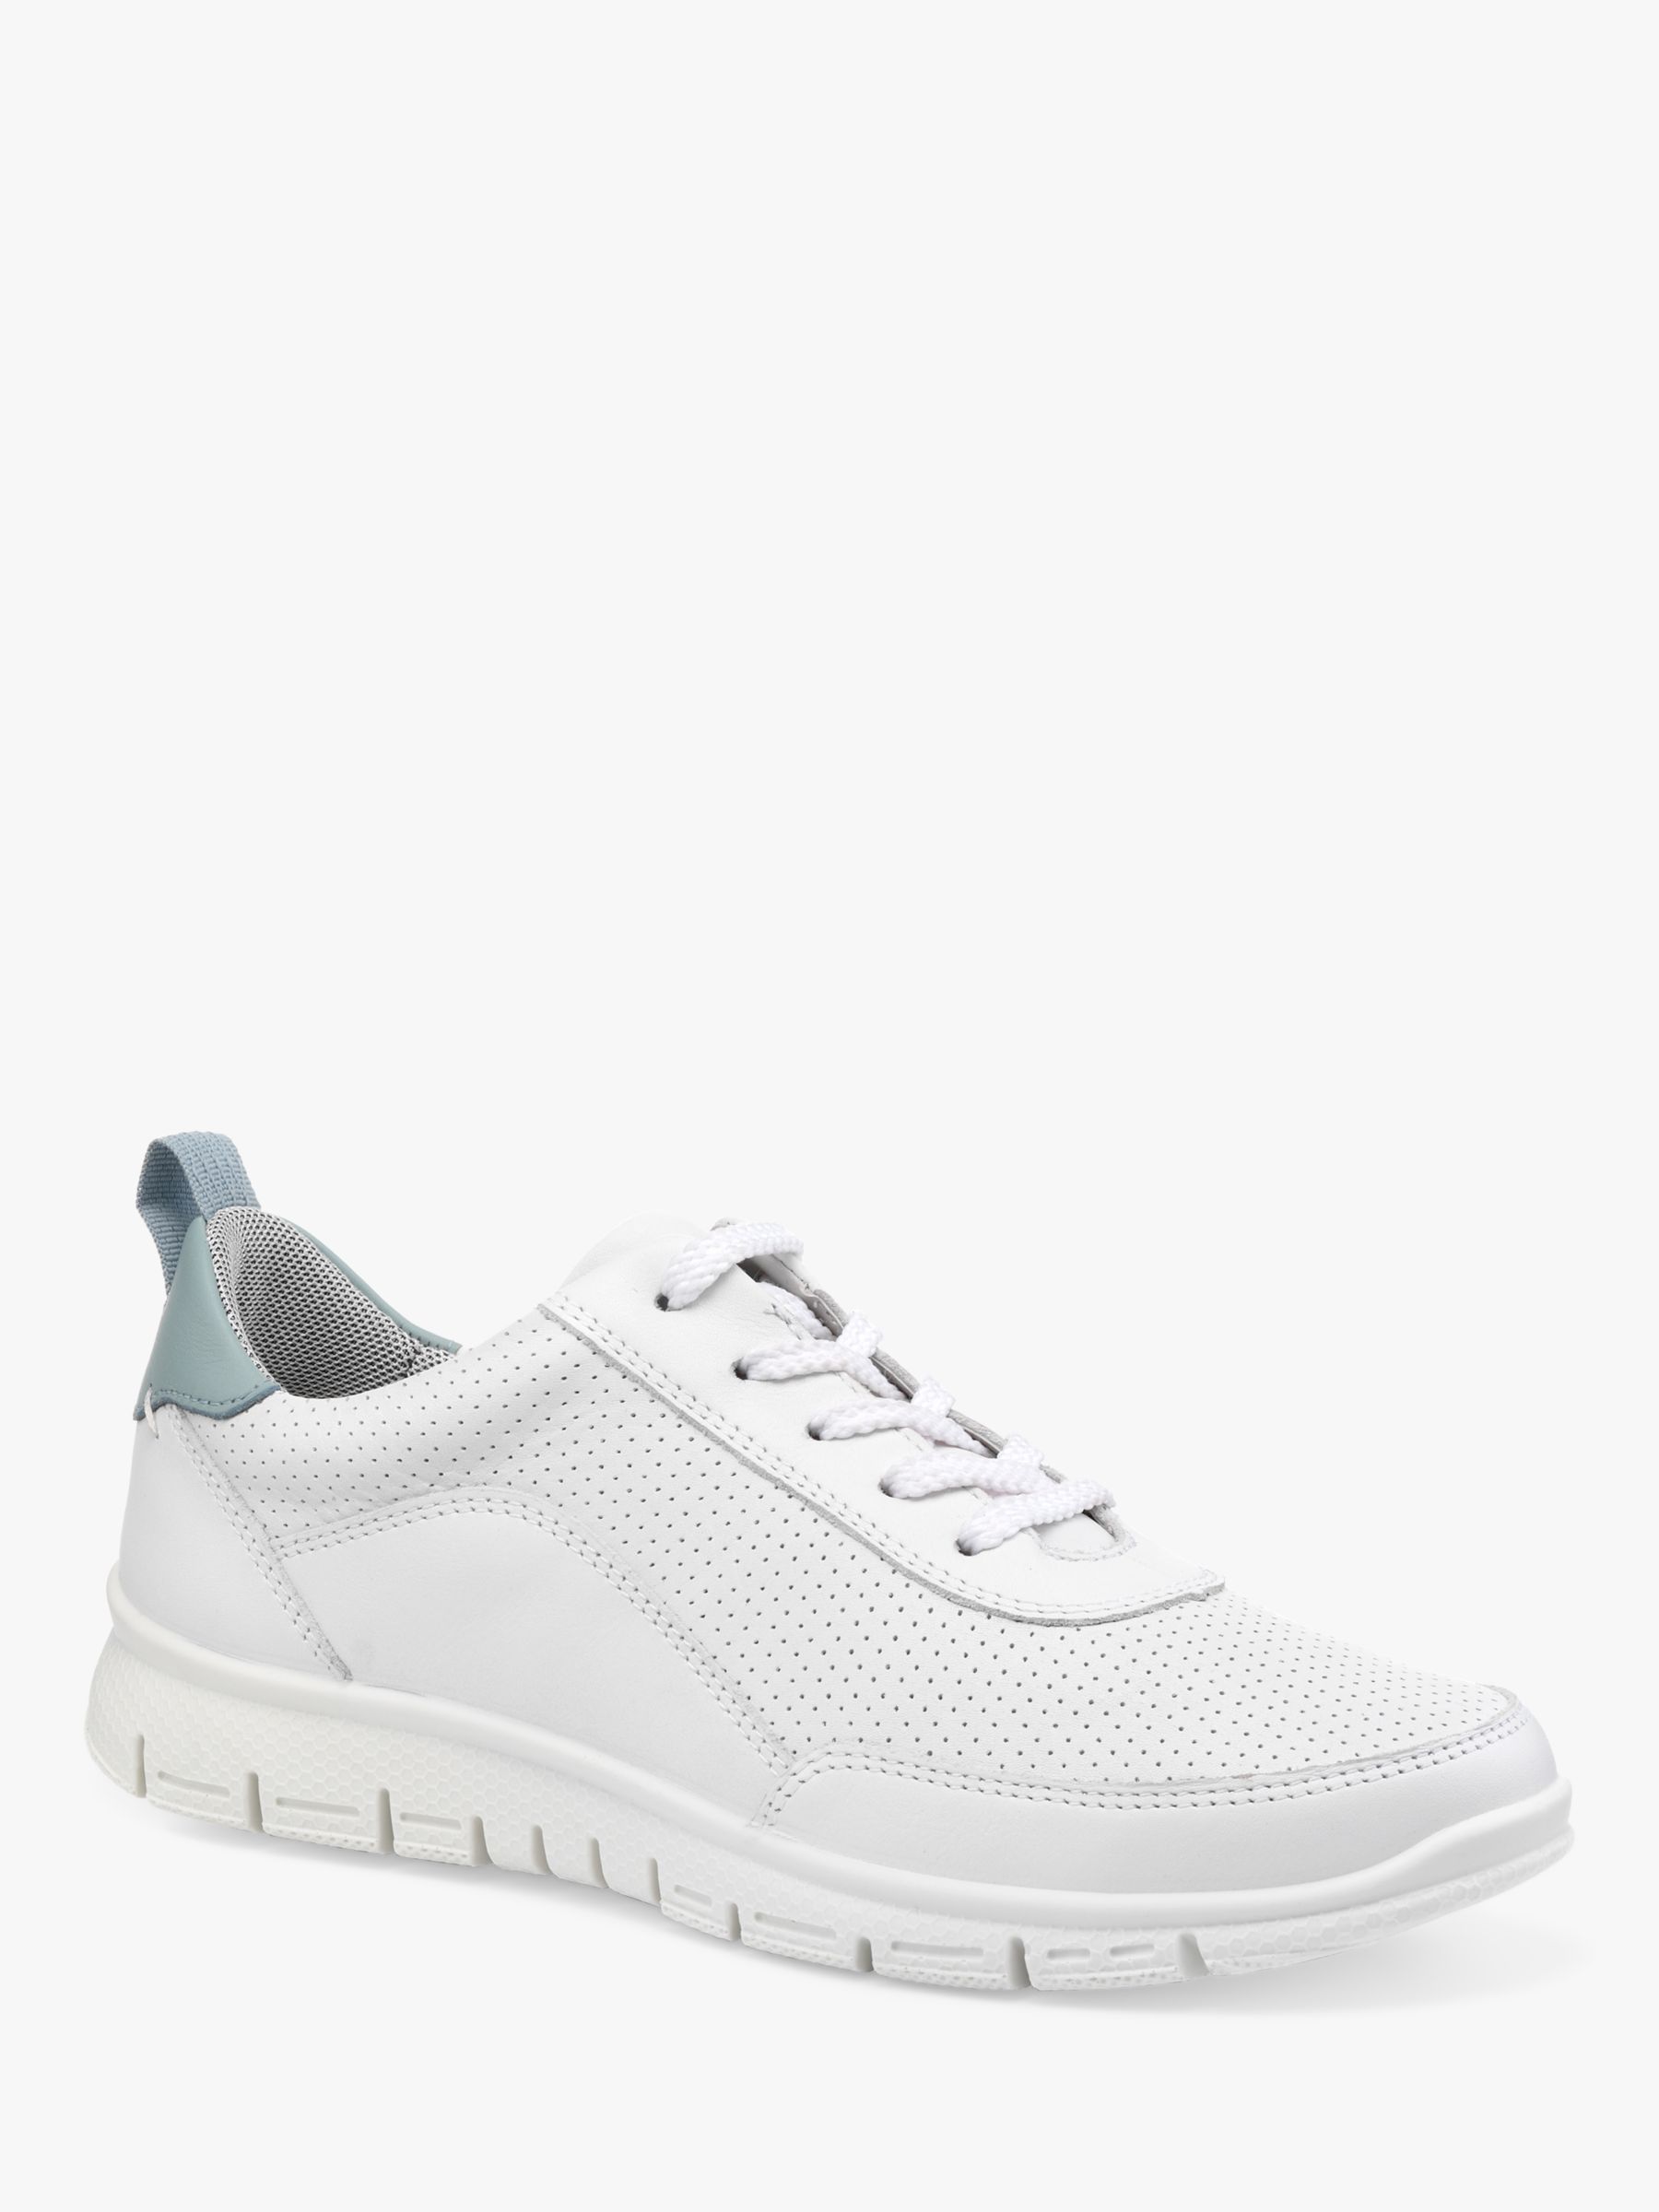 Buy Hotter Gravity II Wide Fit Lightweight Leather Trainers, White/Sage Online at johnlewis.com